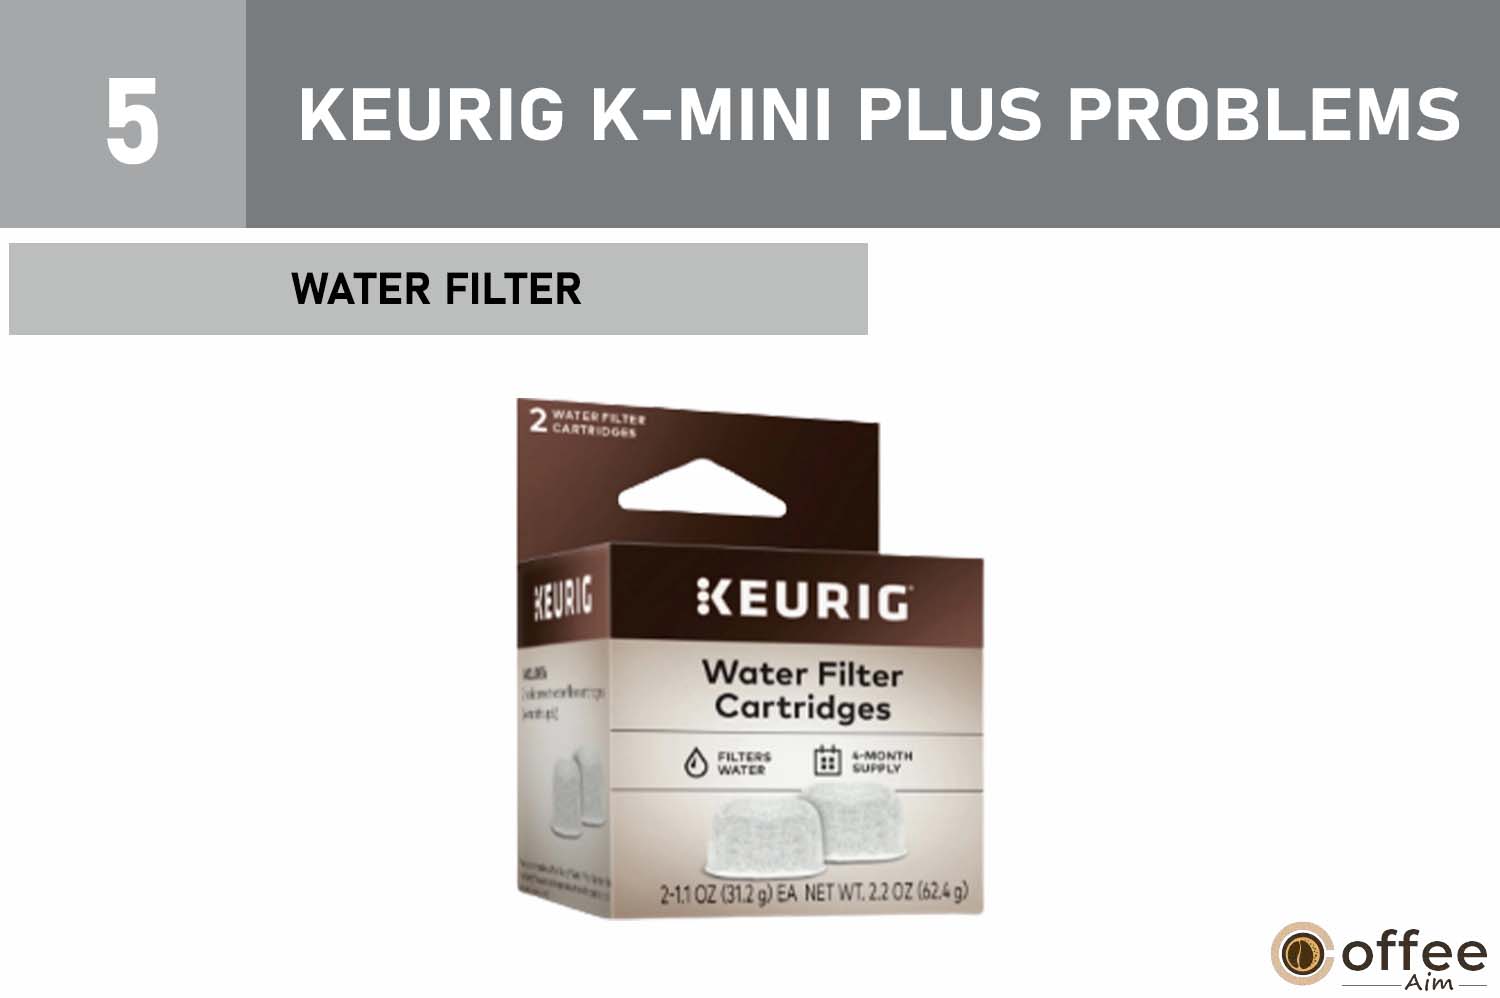 This image details the "Water Filter" for our article on "Keurig K-Mini Plus Problems," providing valuable insights into this aspect of the coffee maker.